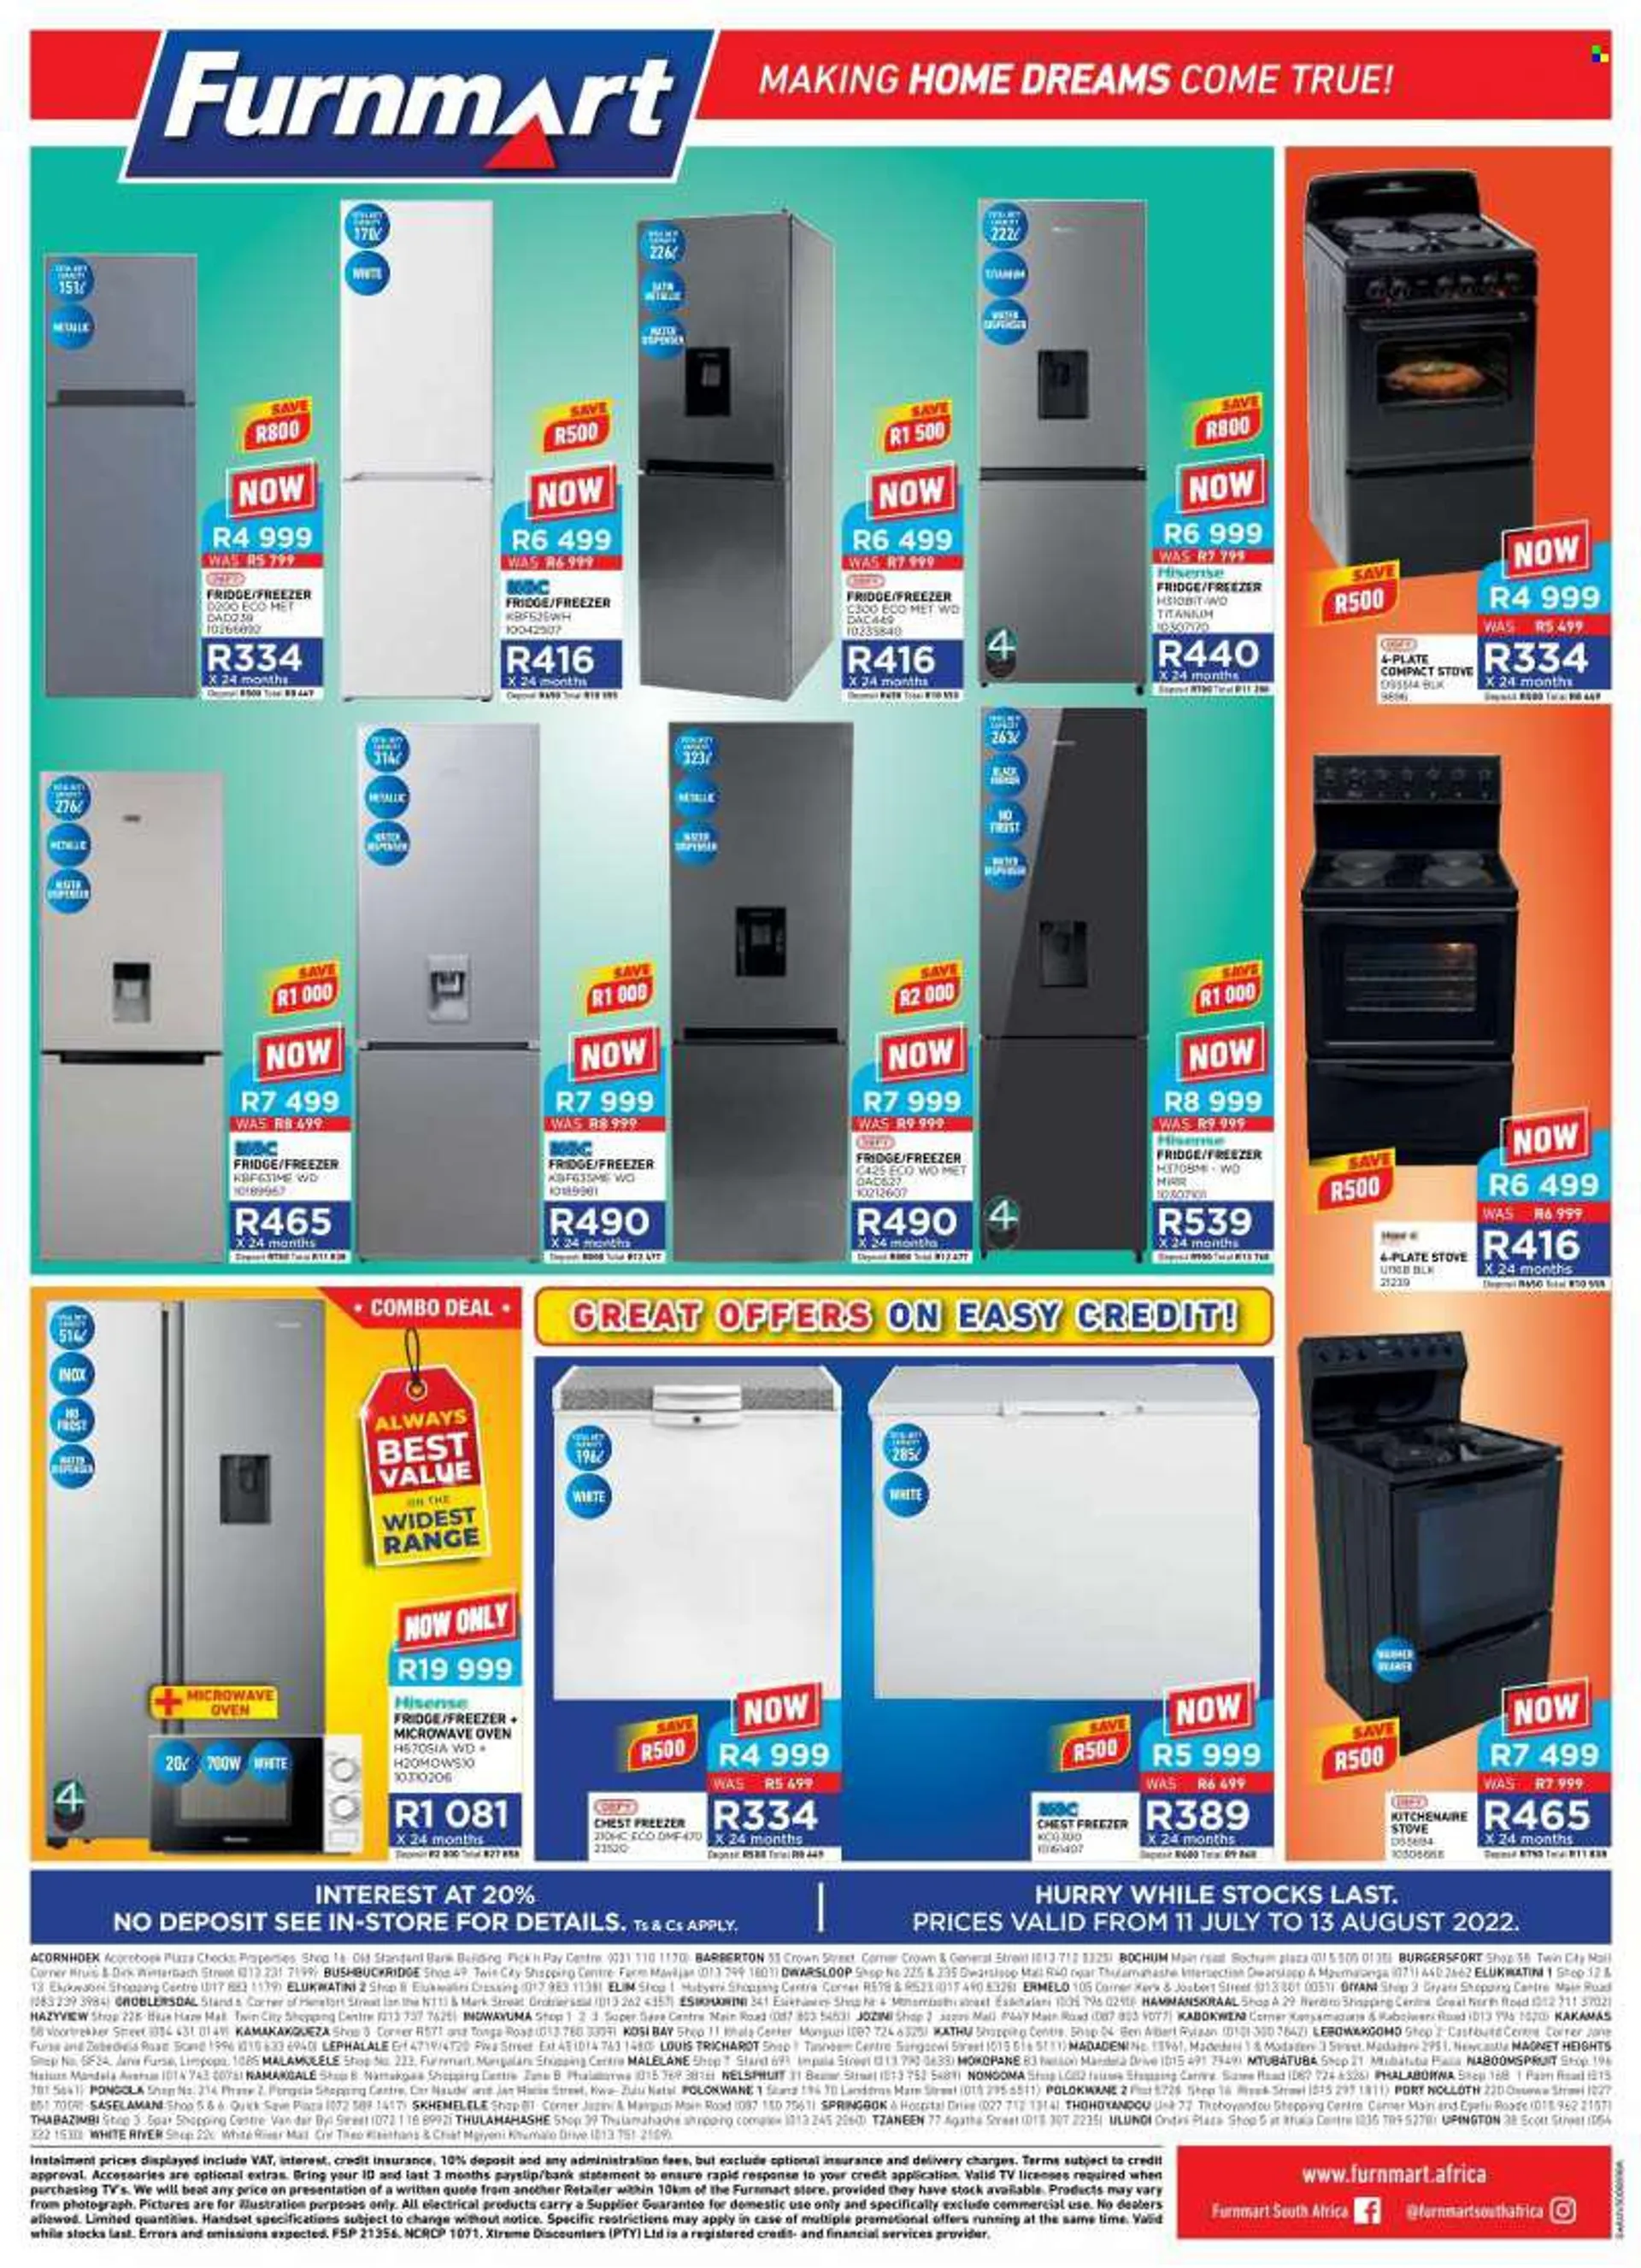 Furnmart catalogue  - 11/07/2022 - 13/08/2022 - Sales products - mirror, WD, TV, freezer, chest freezer, refrigerator, fridge, oven, stove, microwave oven, water dispenser. Page 8.